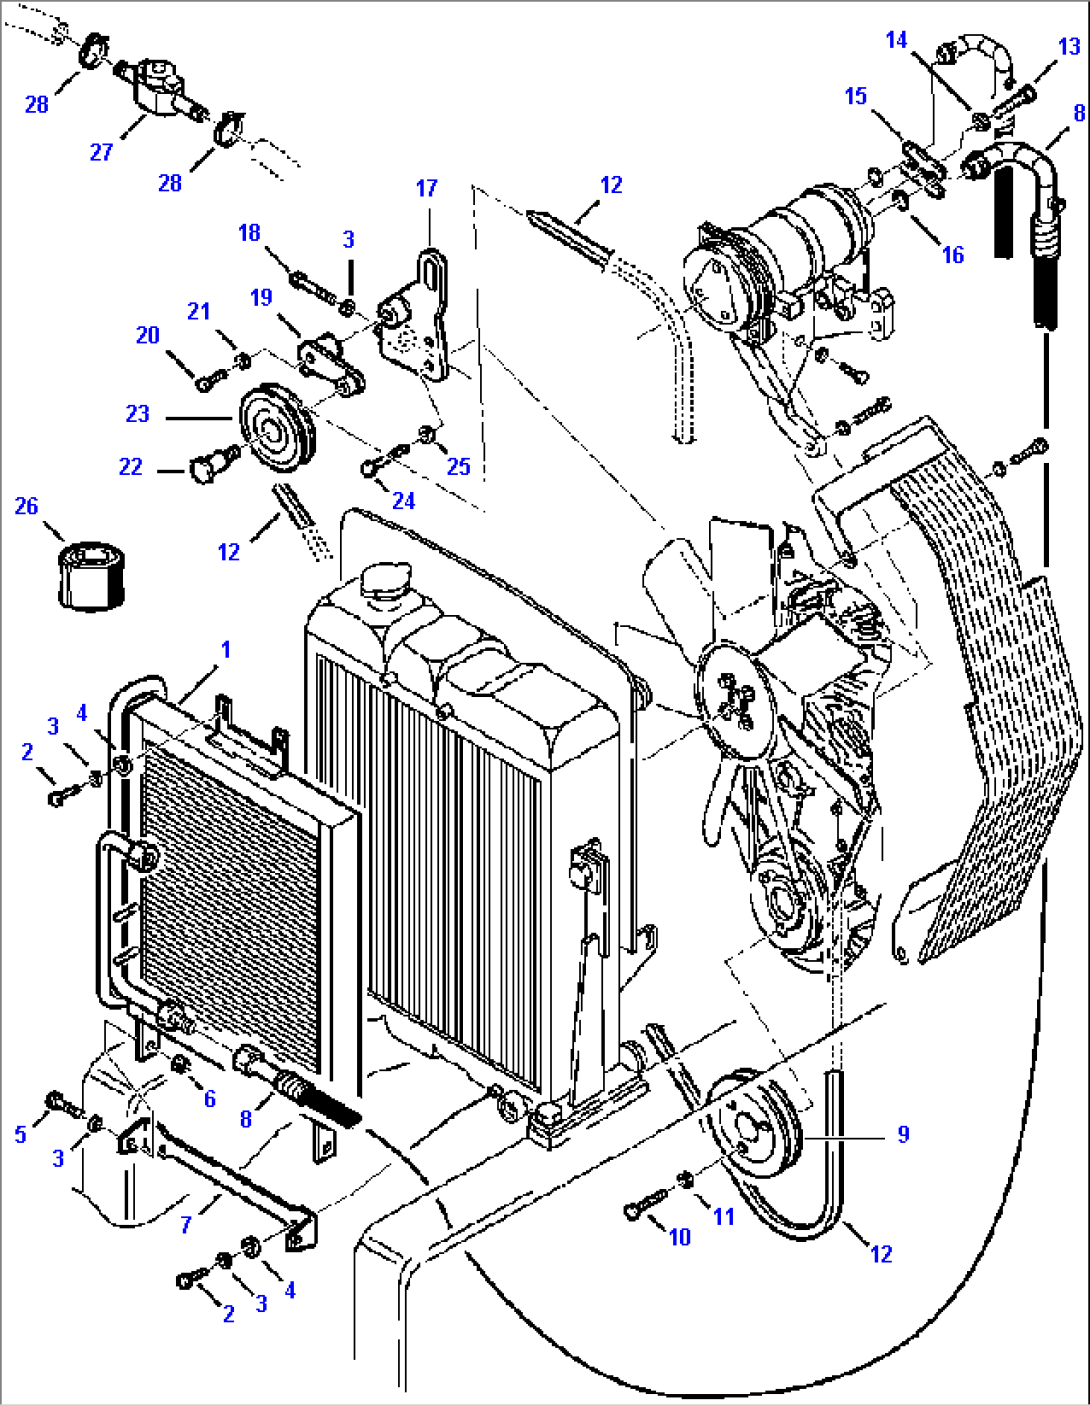 FIG. K5700-01A3 AIR CONDITIONER - CONDENSER PIPING